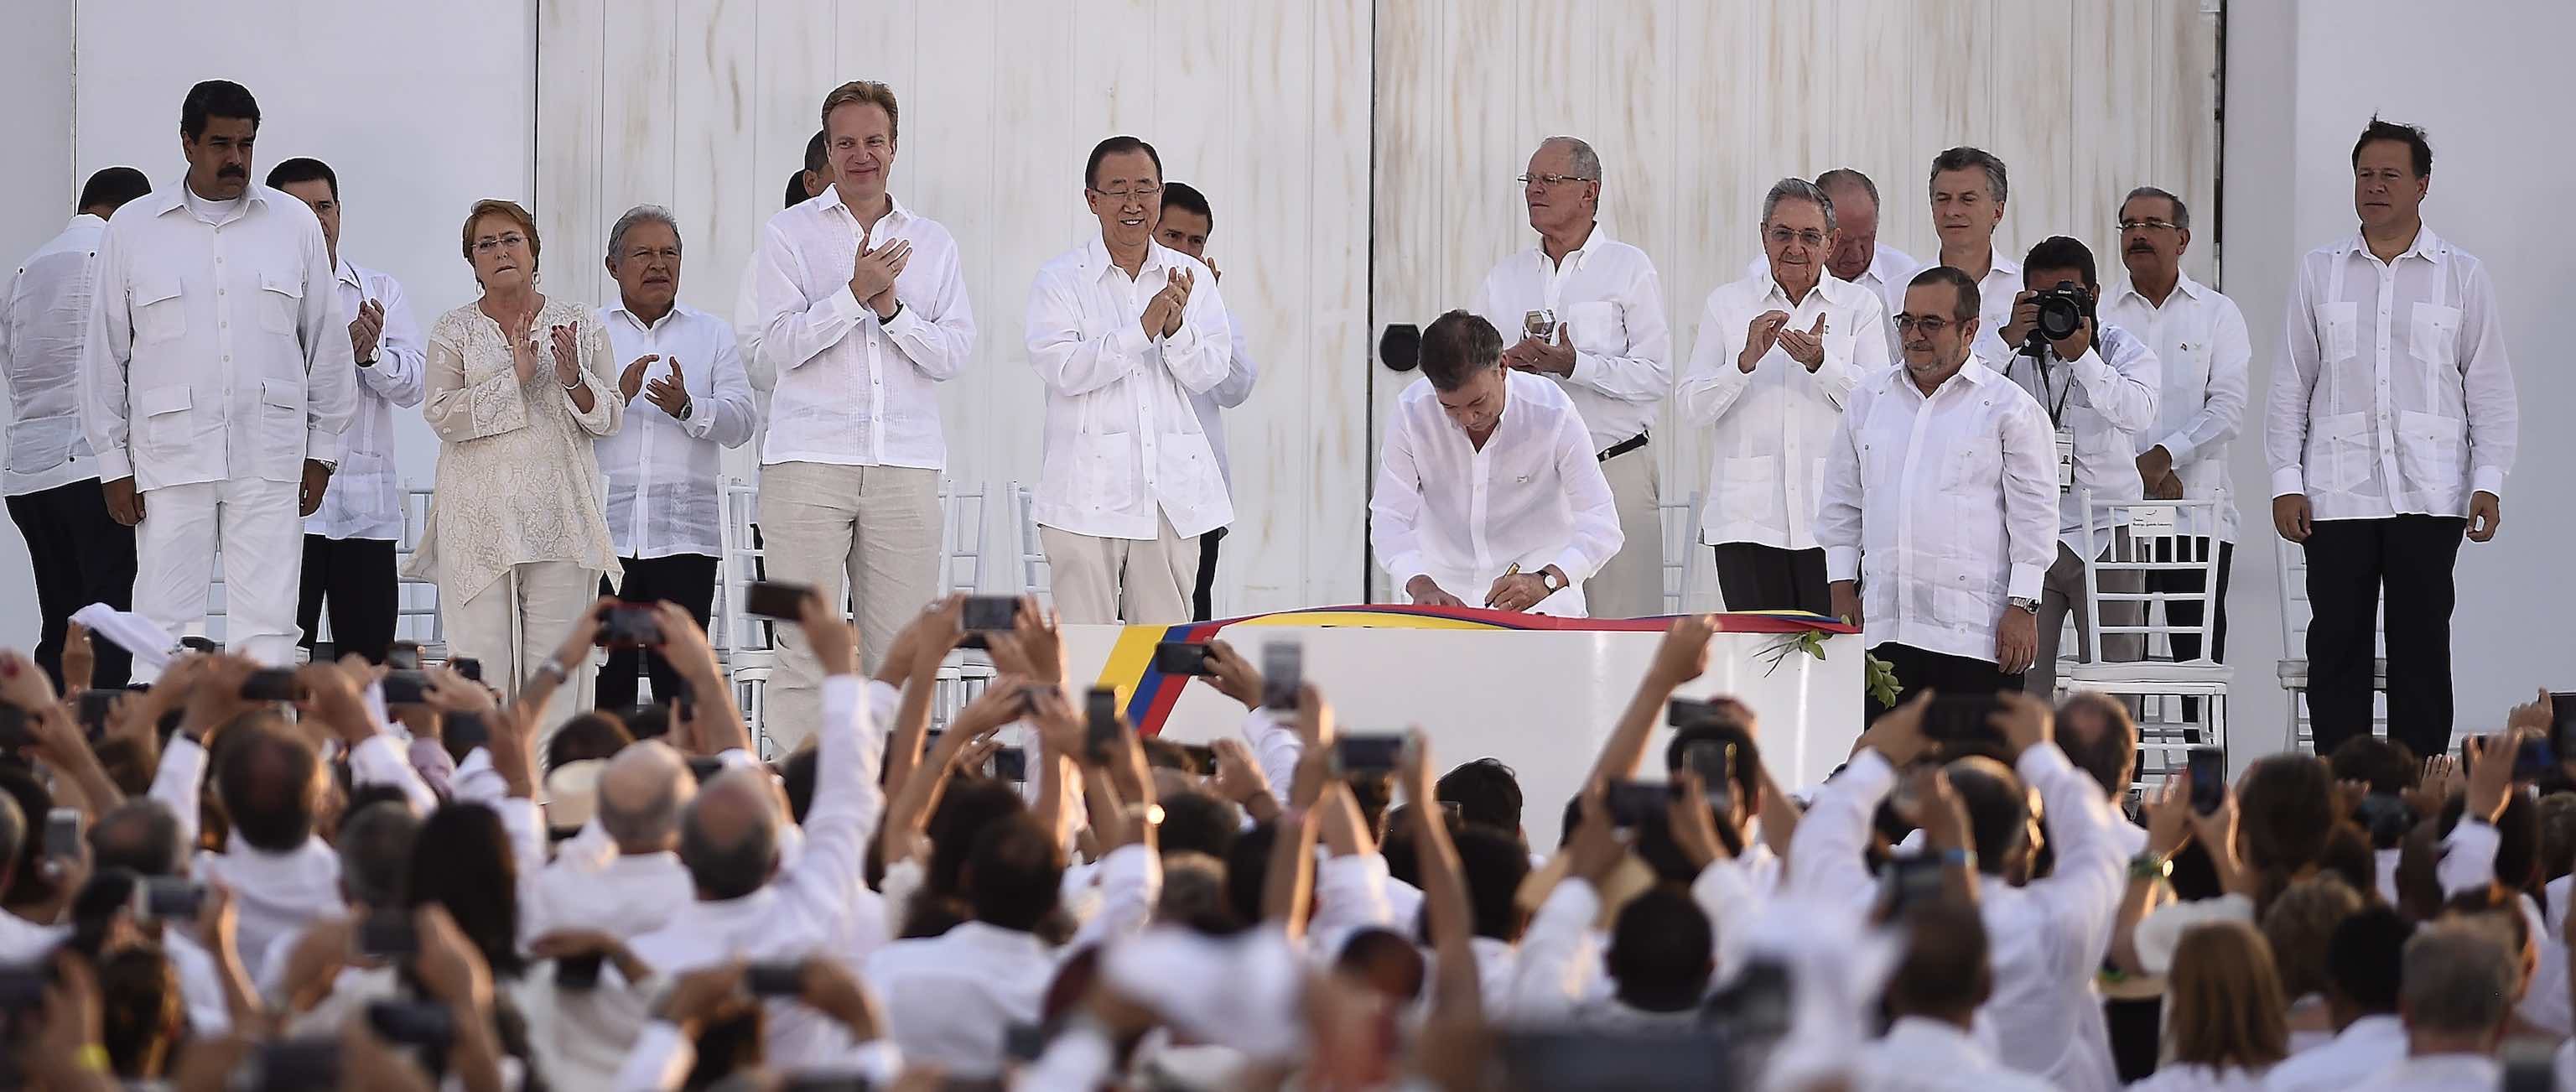 Colombia: Referendum Result Presents Opportunity for Dialogue